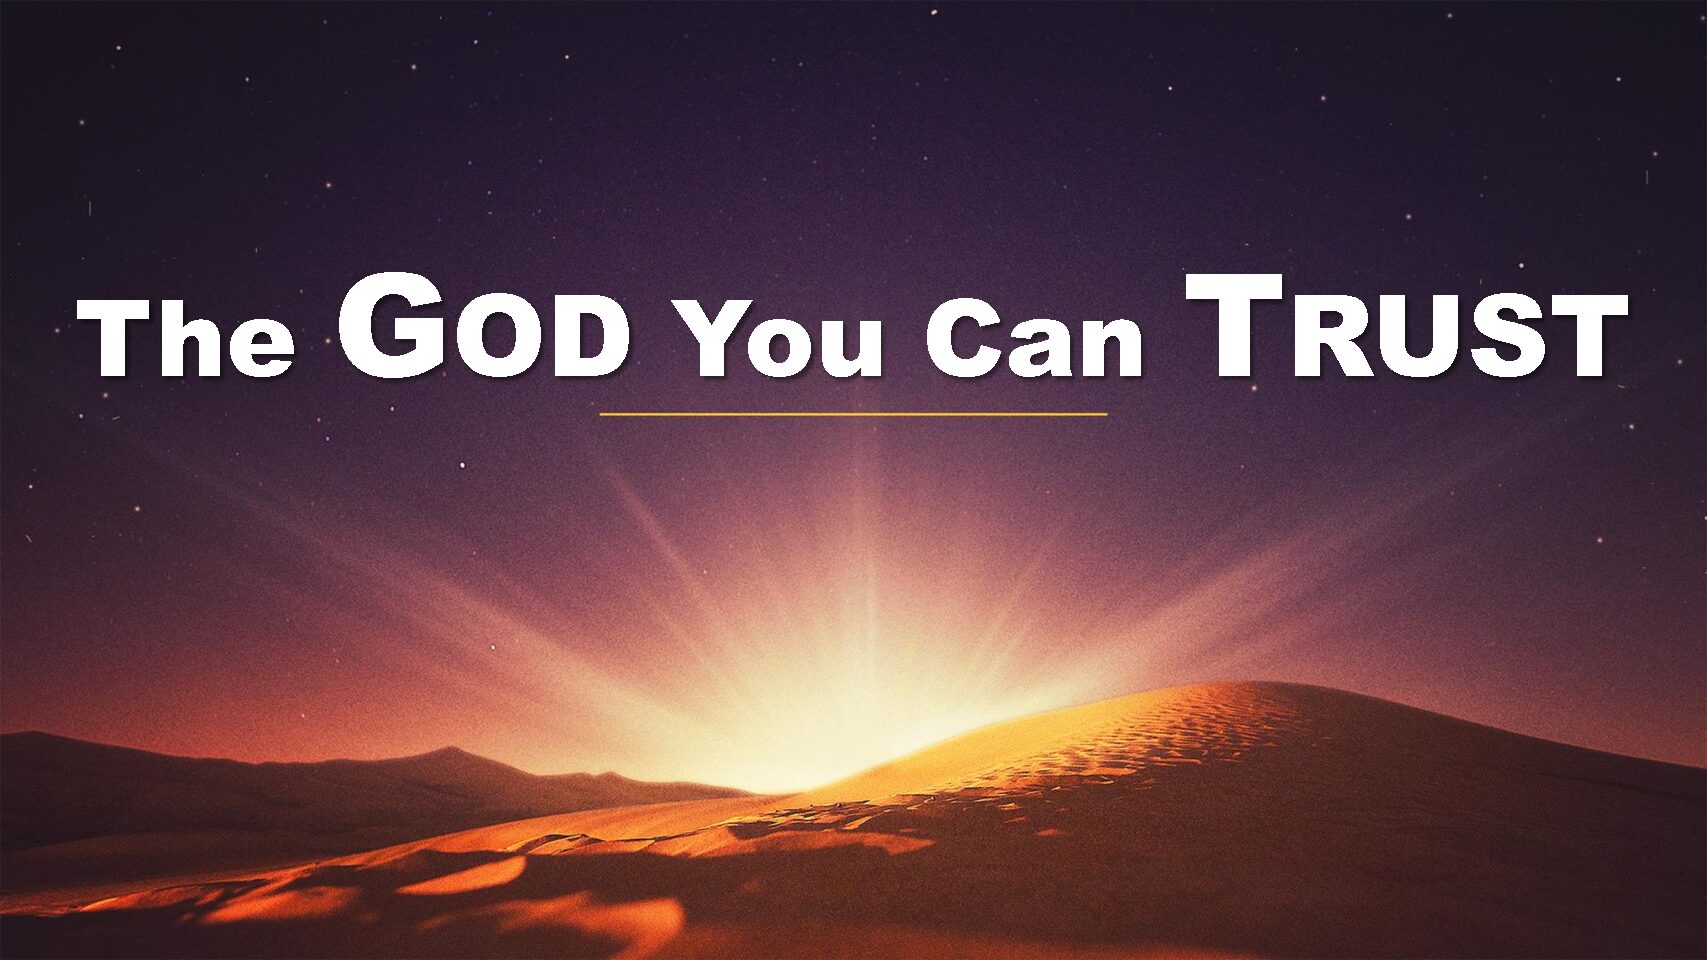 The God You Can Trust